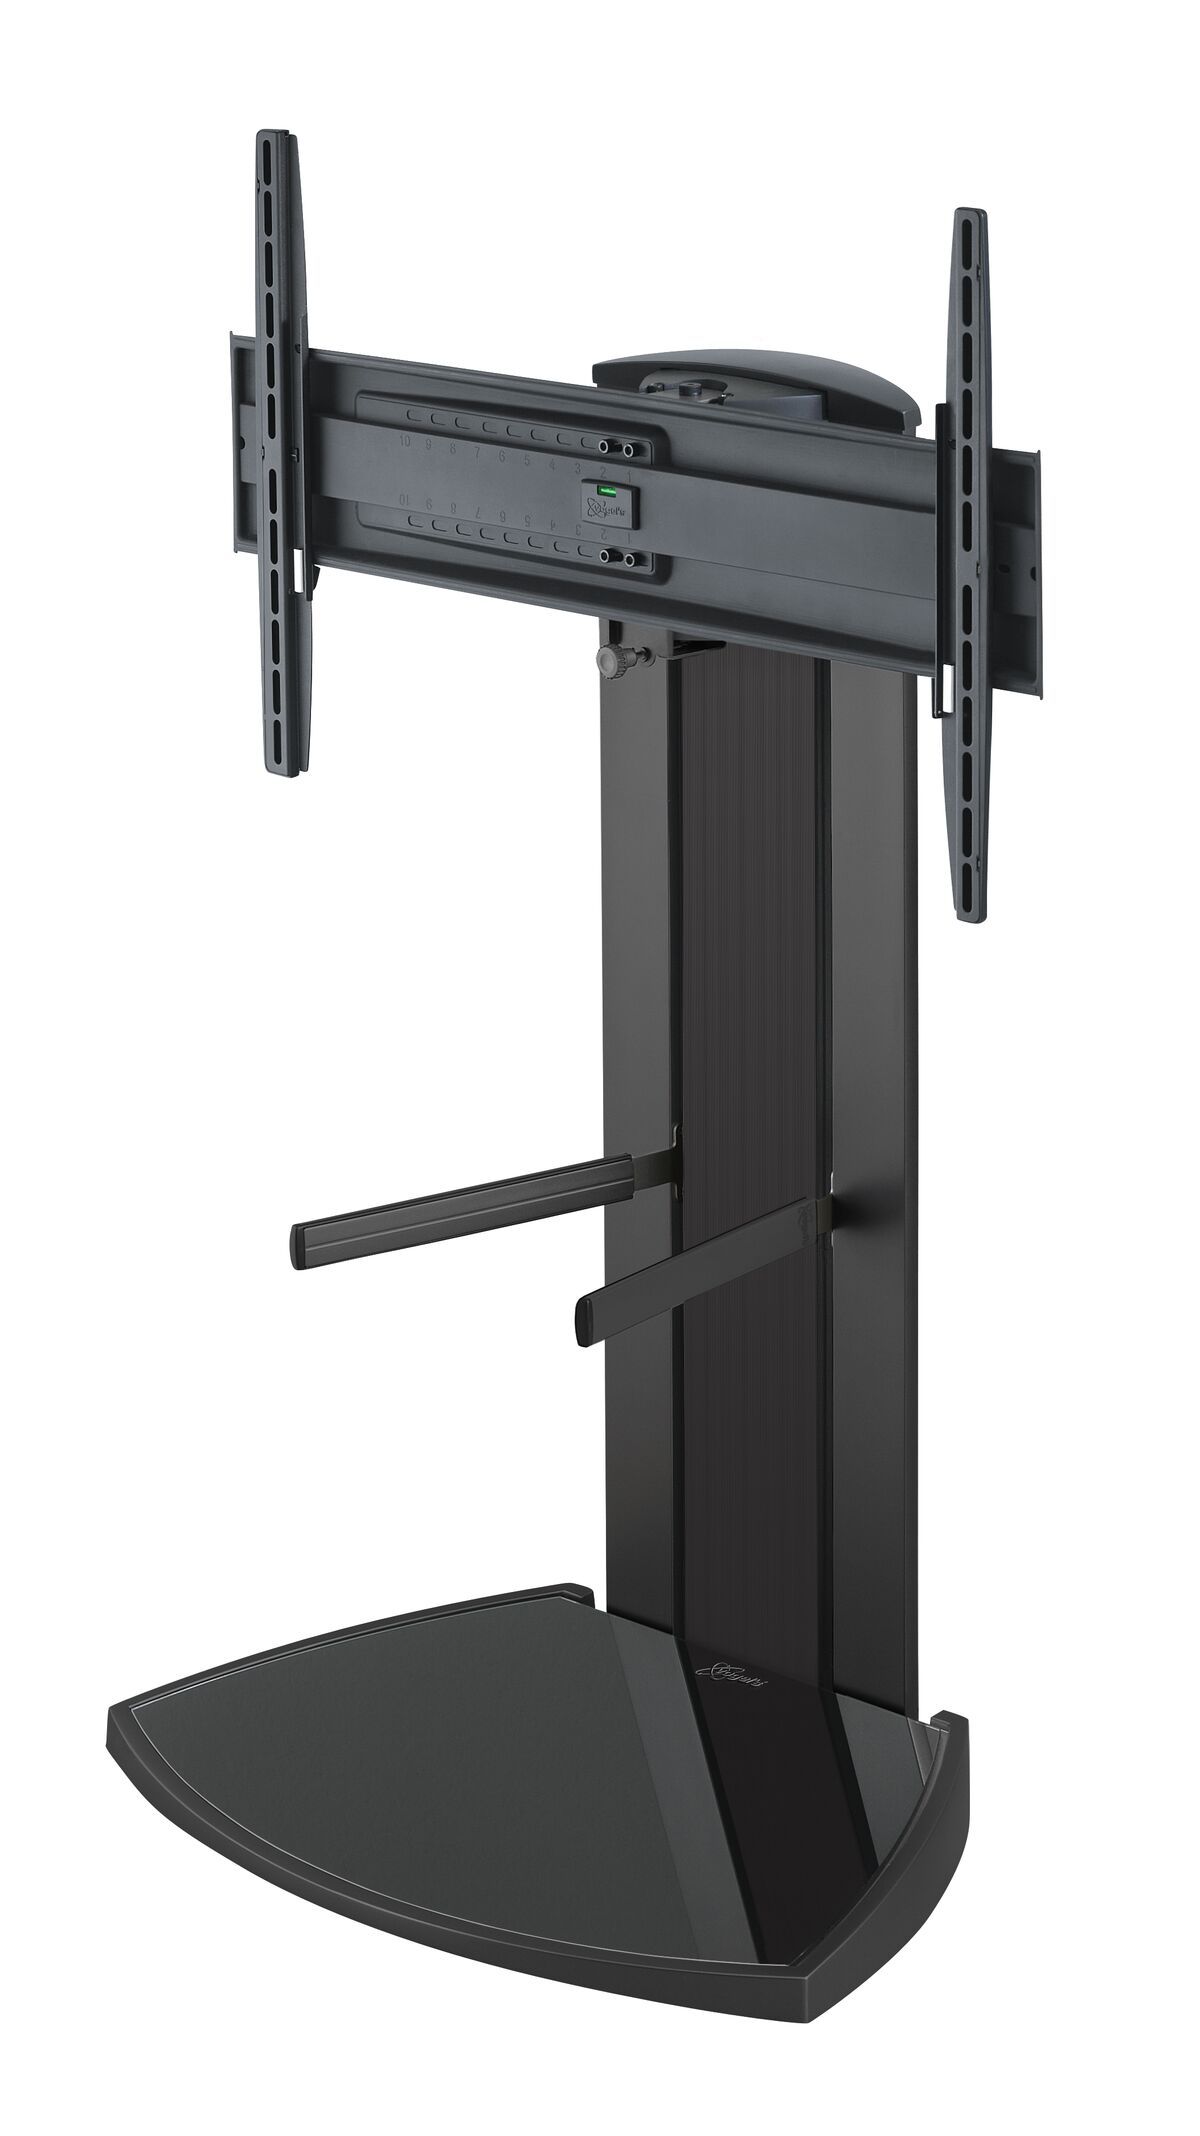 Vogel's EFF 8340 TV Floor Stand (black) - Suitable for 40 up to 65 inch TVs up to Product